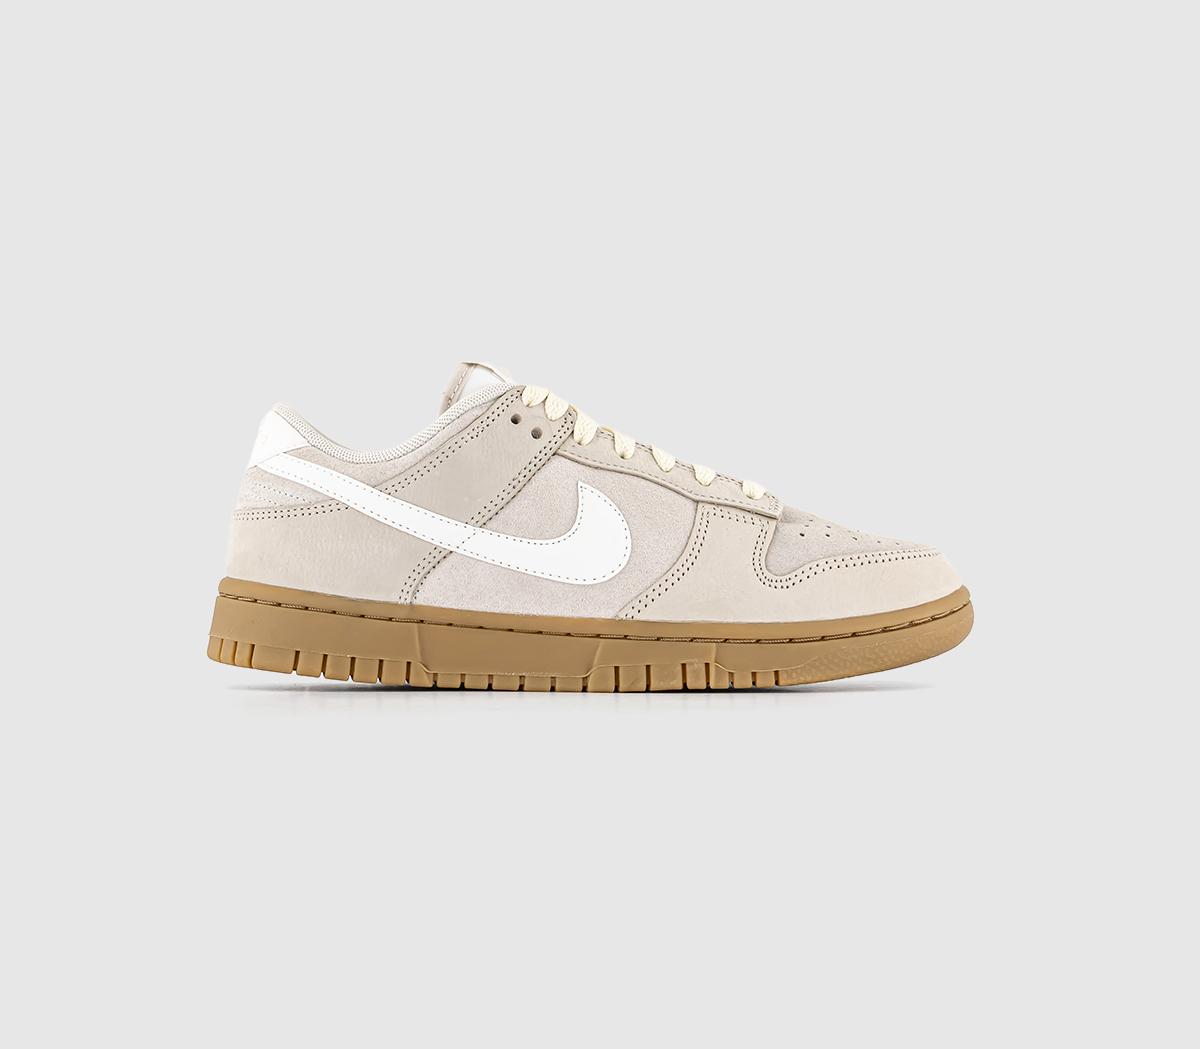 Nike Dunk Low Trainers Light Orewood Brown Sail Gum Light Brown